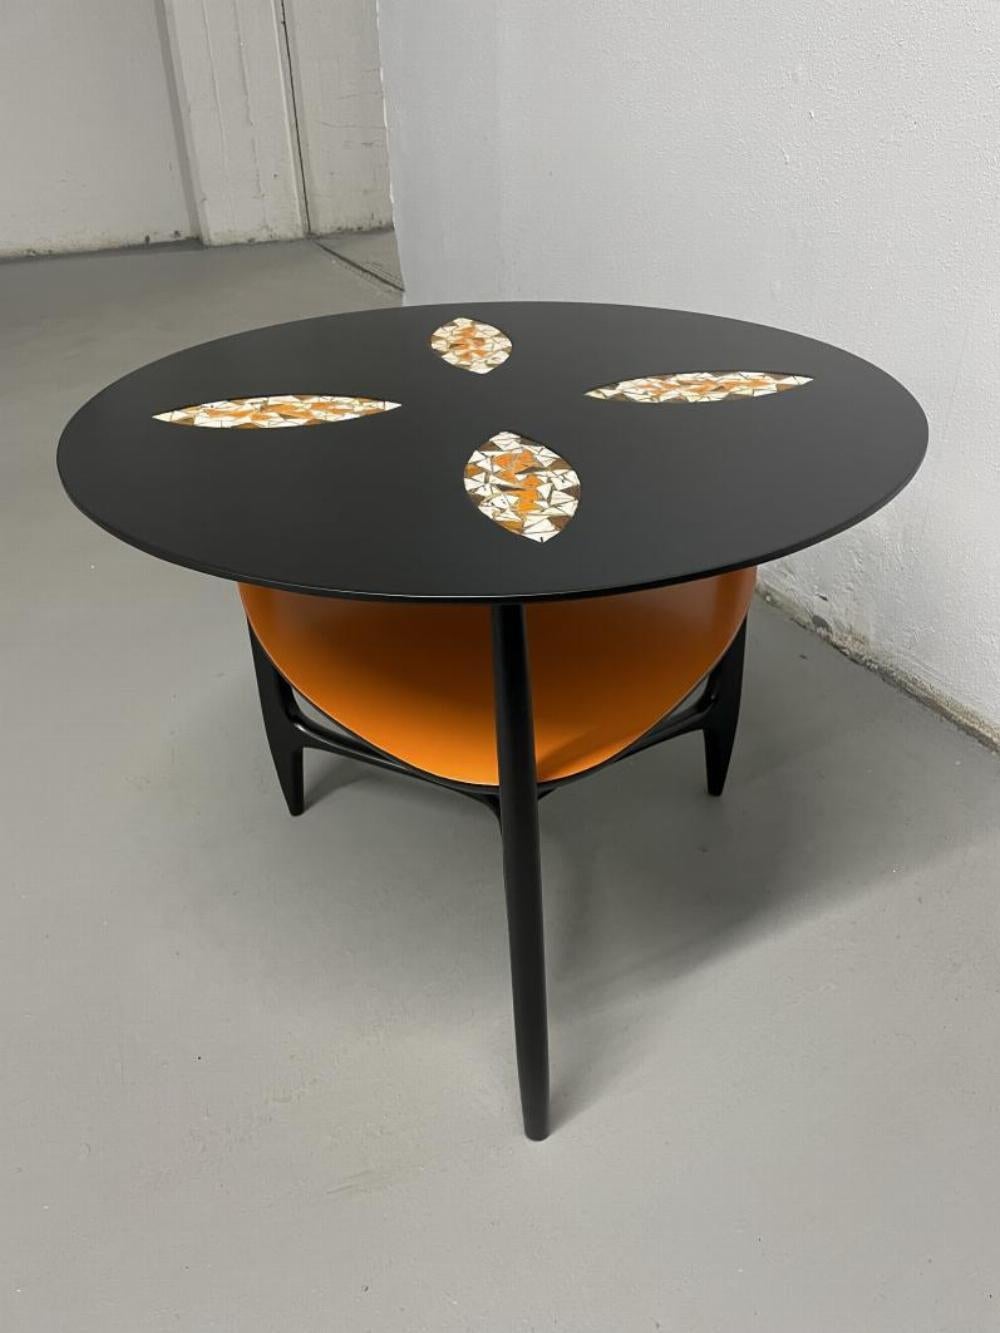 Italian Mid Century side table with Vintage Hand Painted Tile Inset.